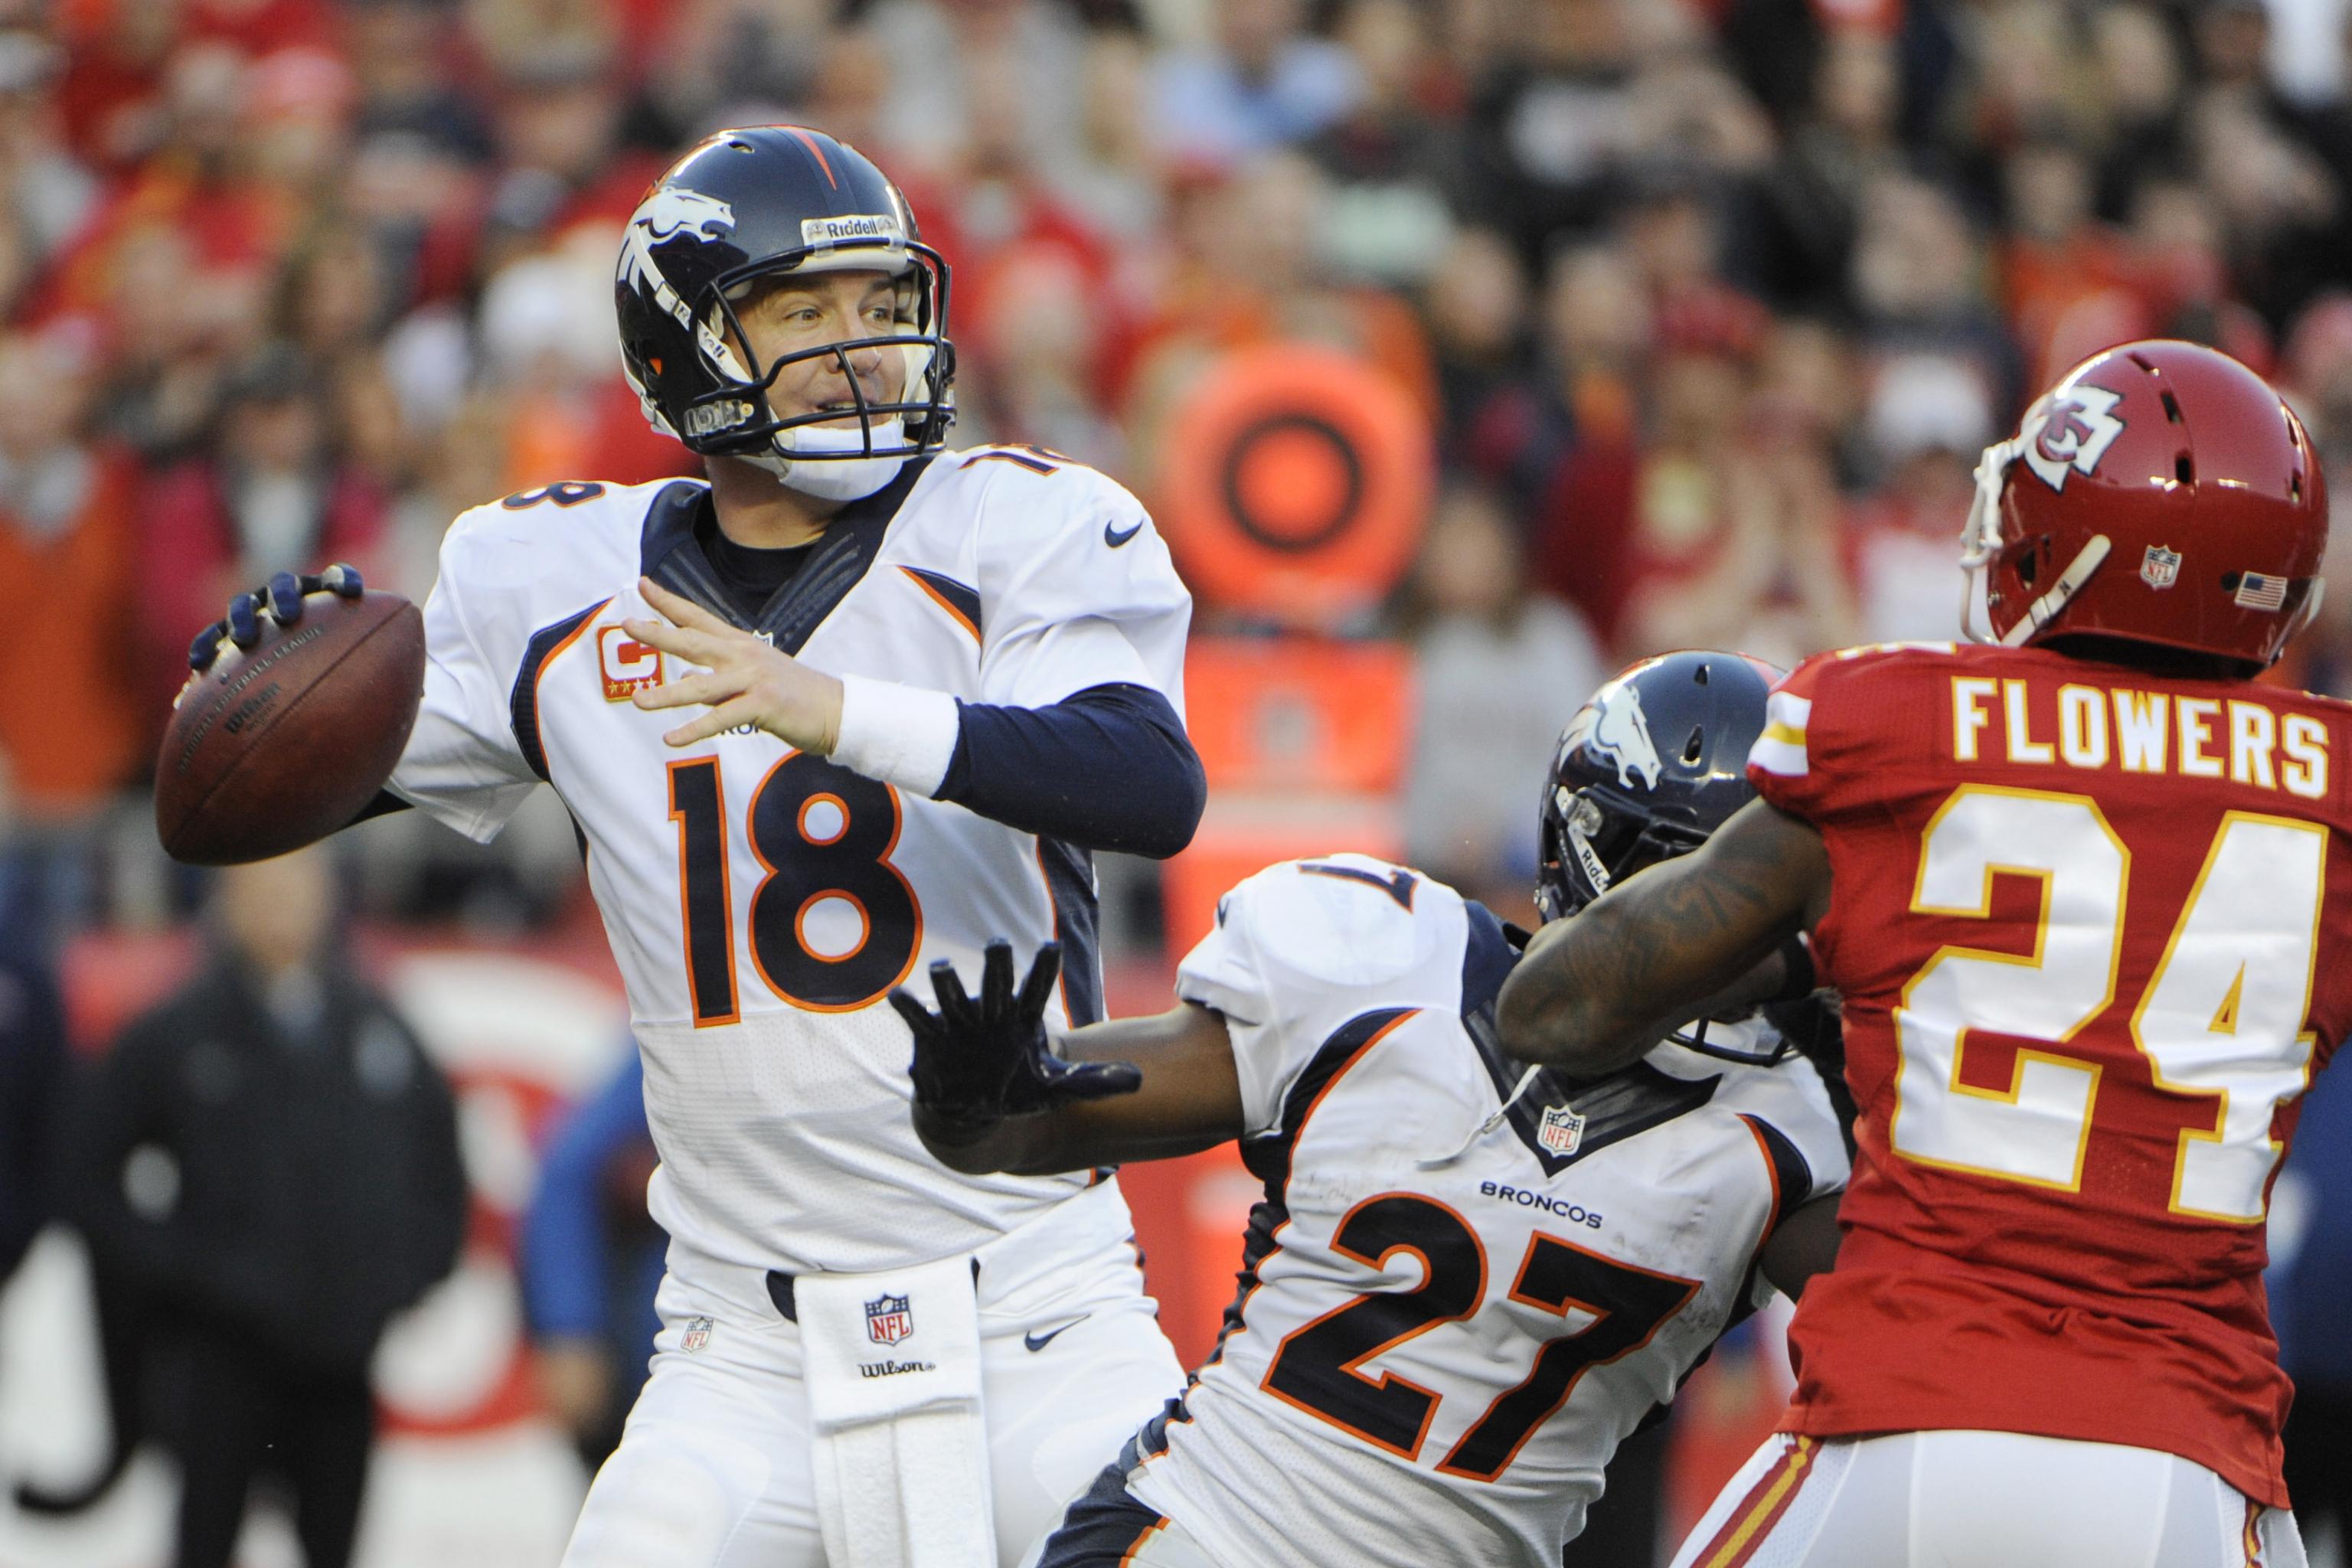 Chiefs vs. Broncos winners and losers, highlights, score, top plays